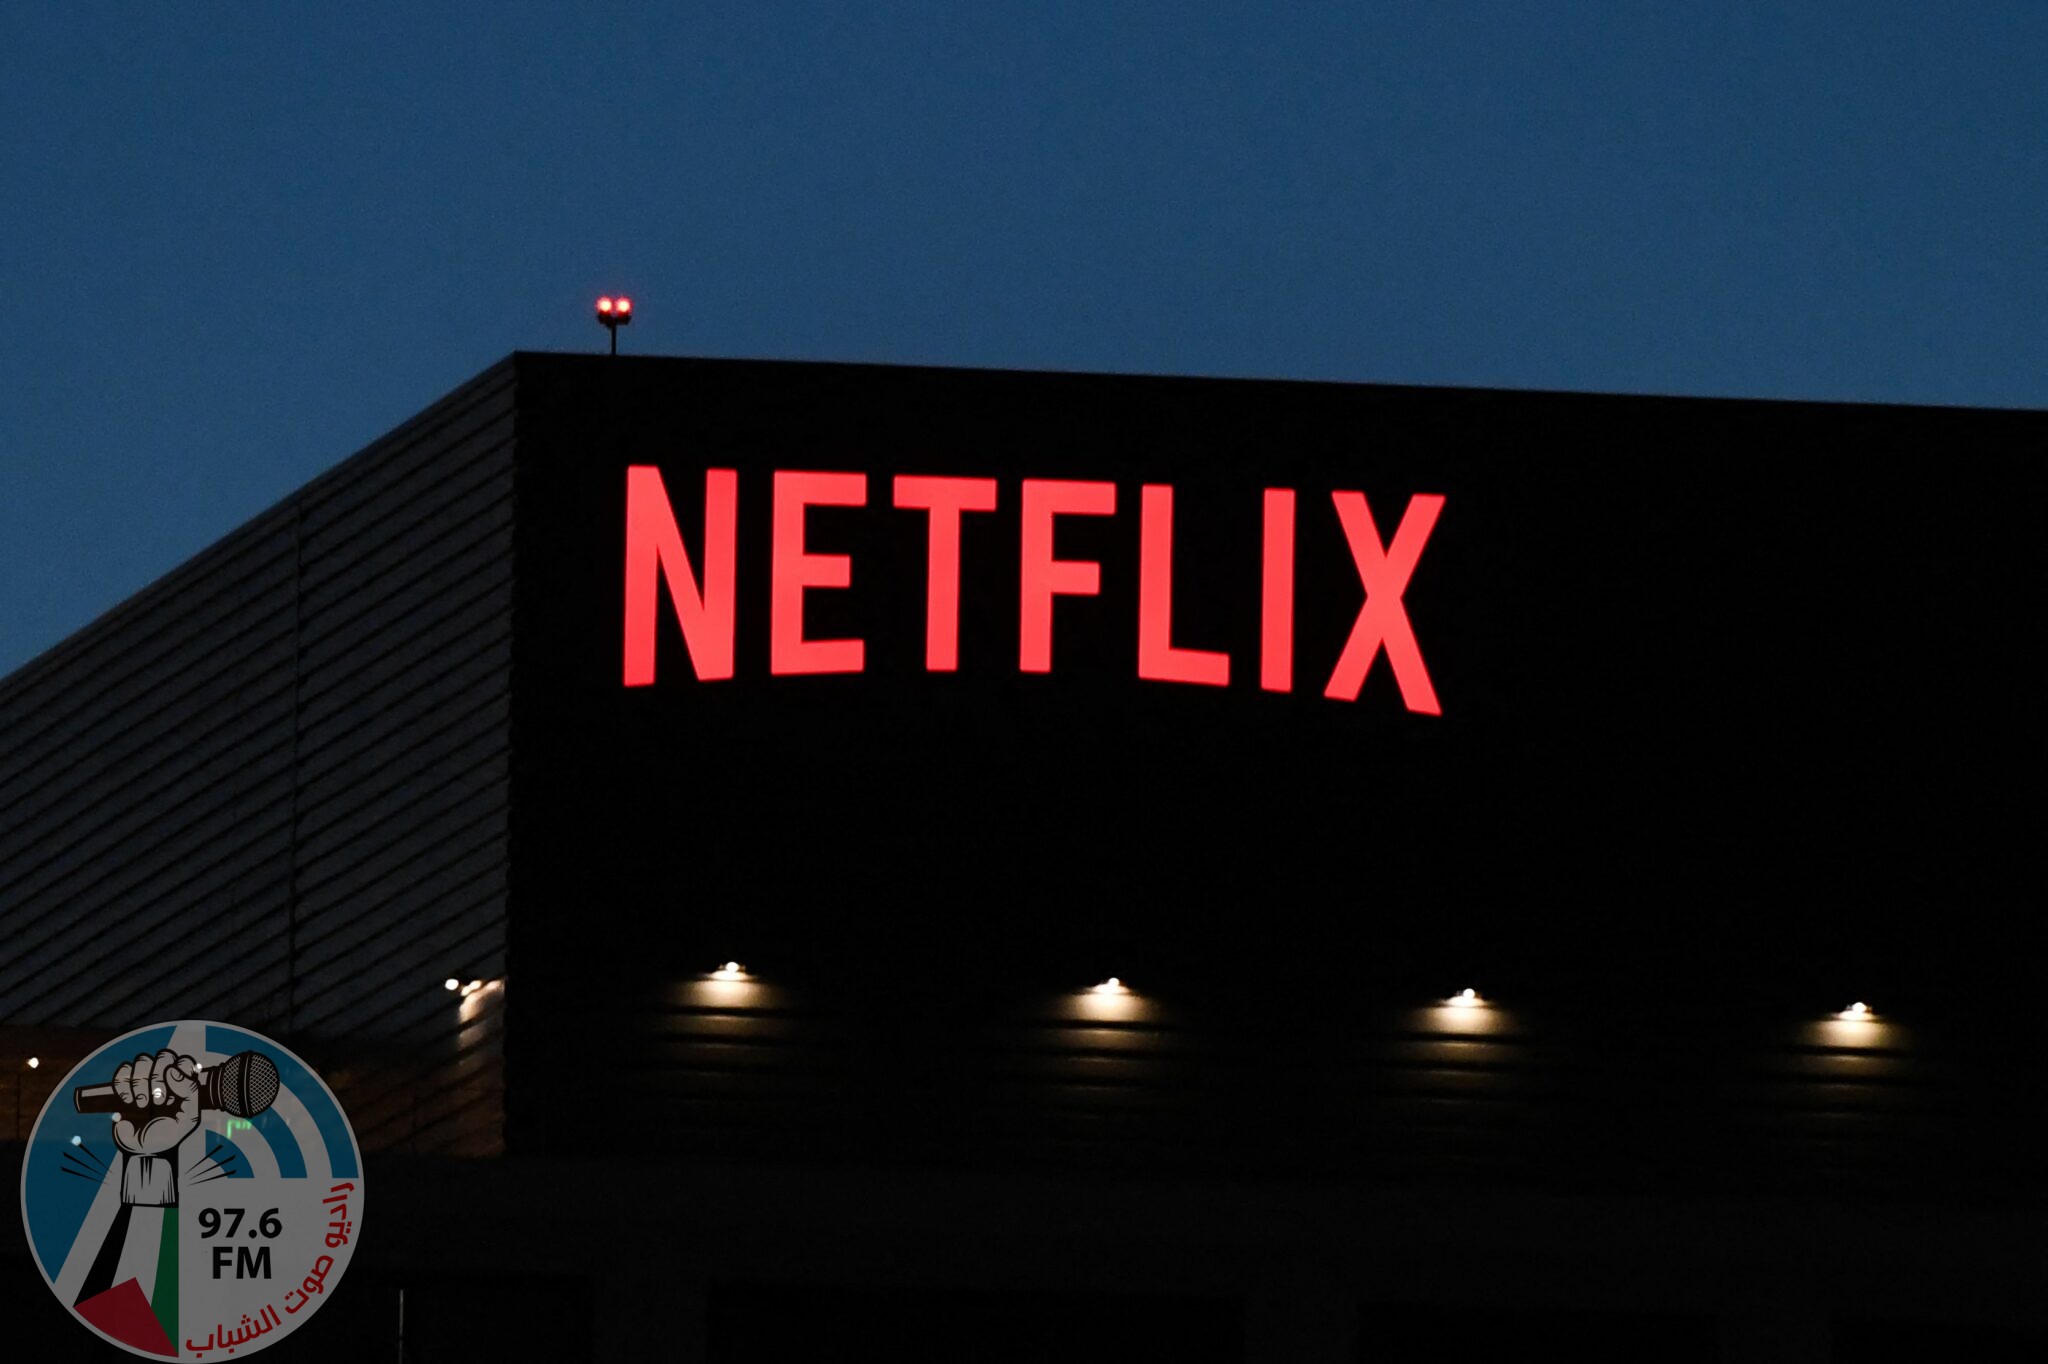 (FILES) In this file photo taken on October 19, 2021, the Netflix logo is seen on the Netflix, Inc. building on Sunset Boulevard in Los Angeles, California. Streaming giant Netflix has suspended its service in Russia, US media reported on March 6, 2022, in protest of Moscow's invasion of Ukraine. (Photo by Robyn Beck / AFP)